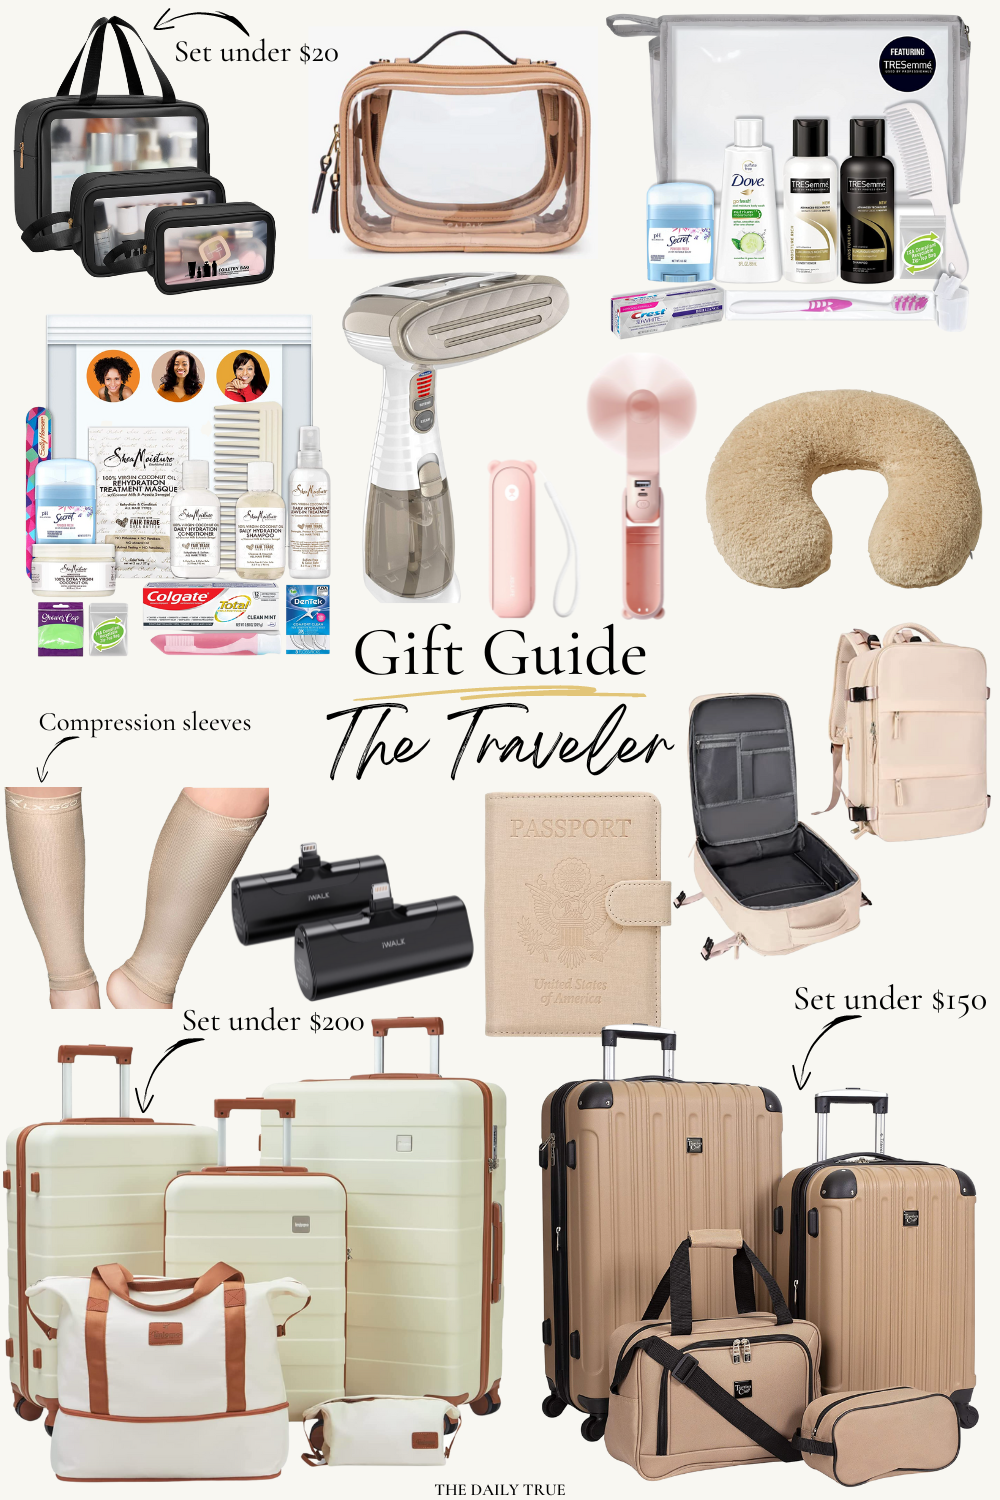 29 Gifts for Hard to Buy for Women — 2022 Gift Guide